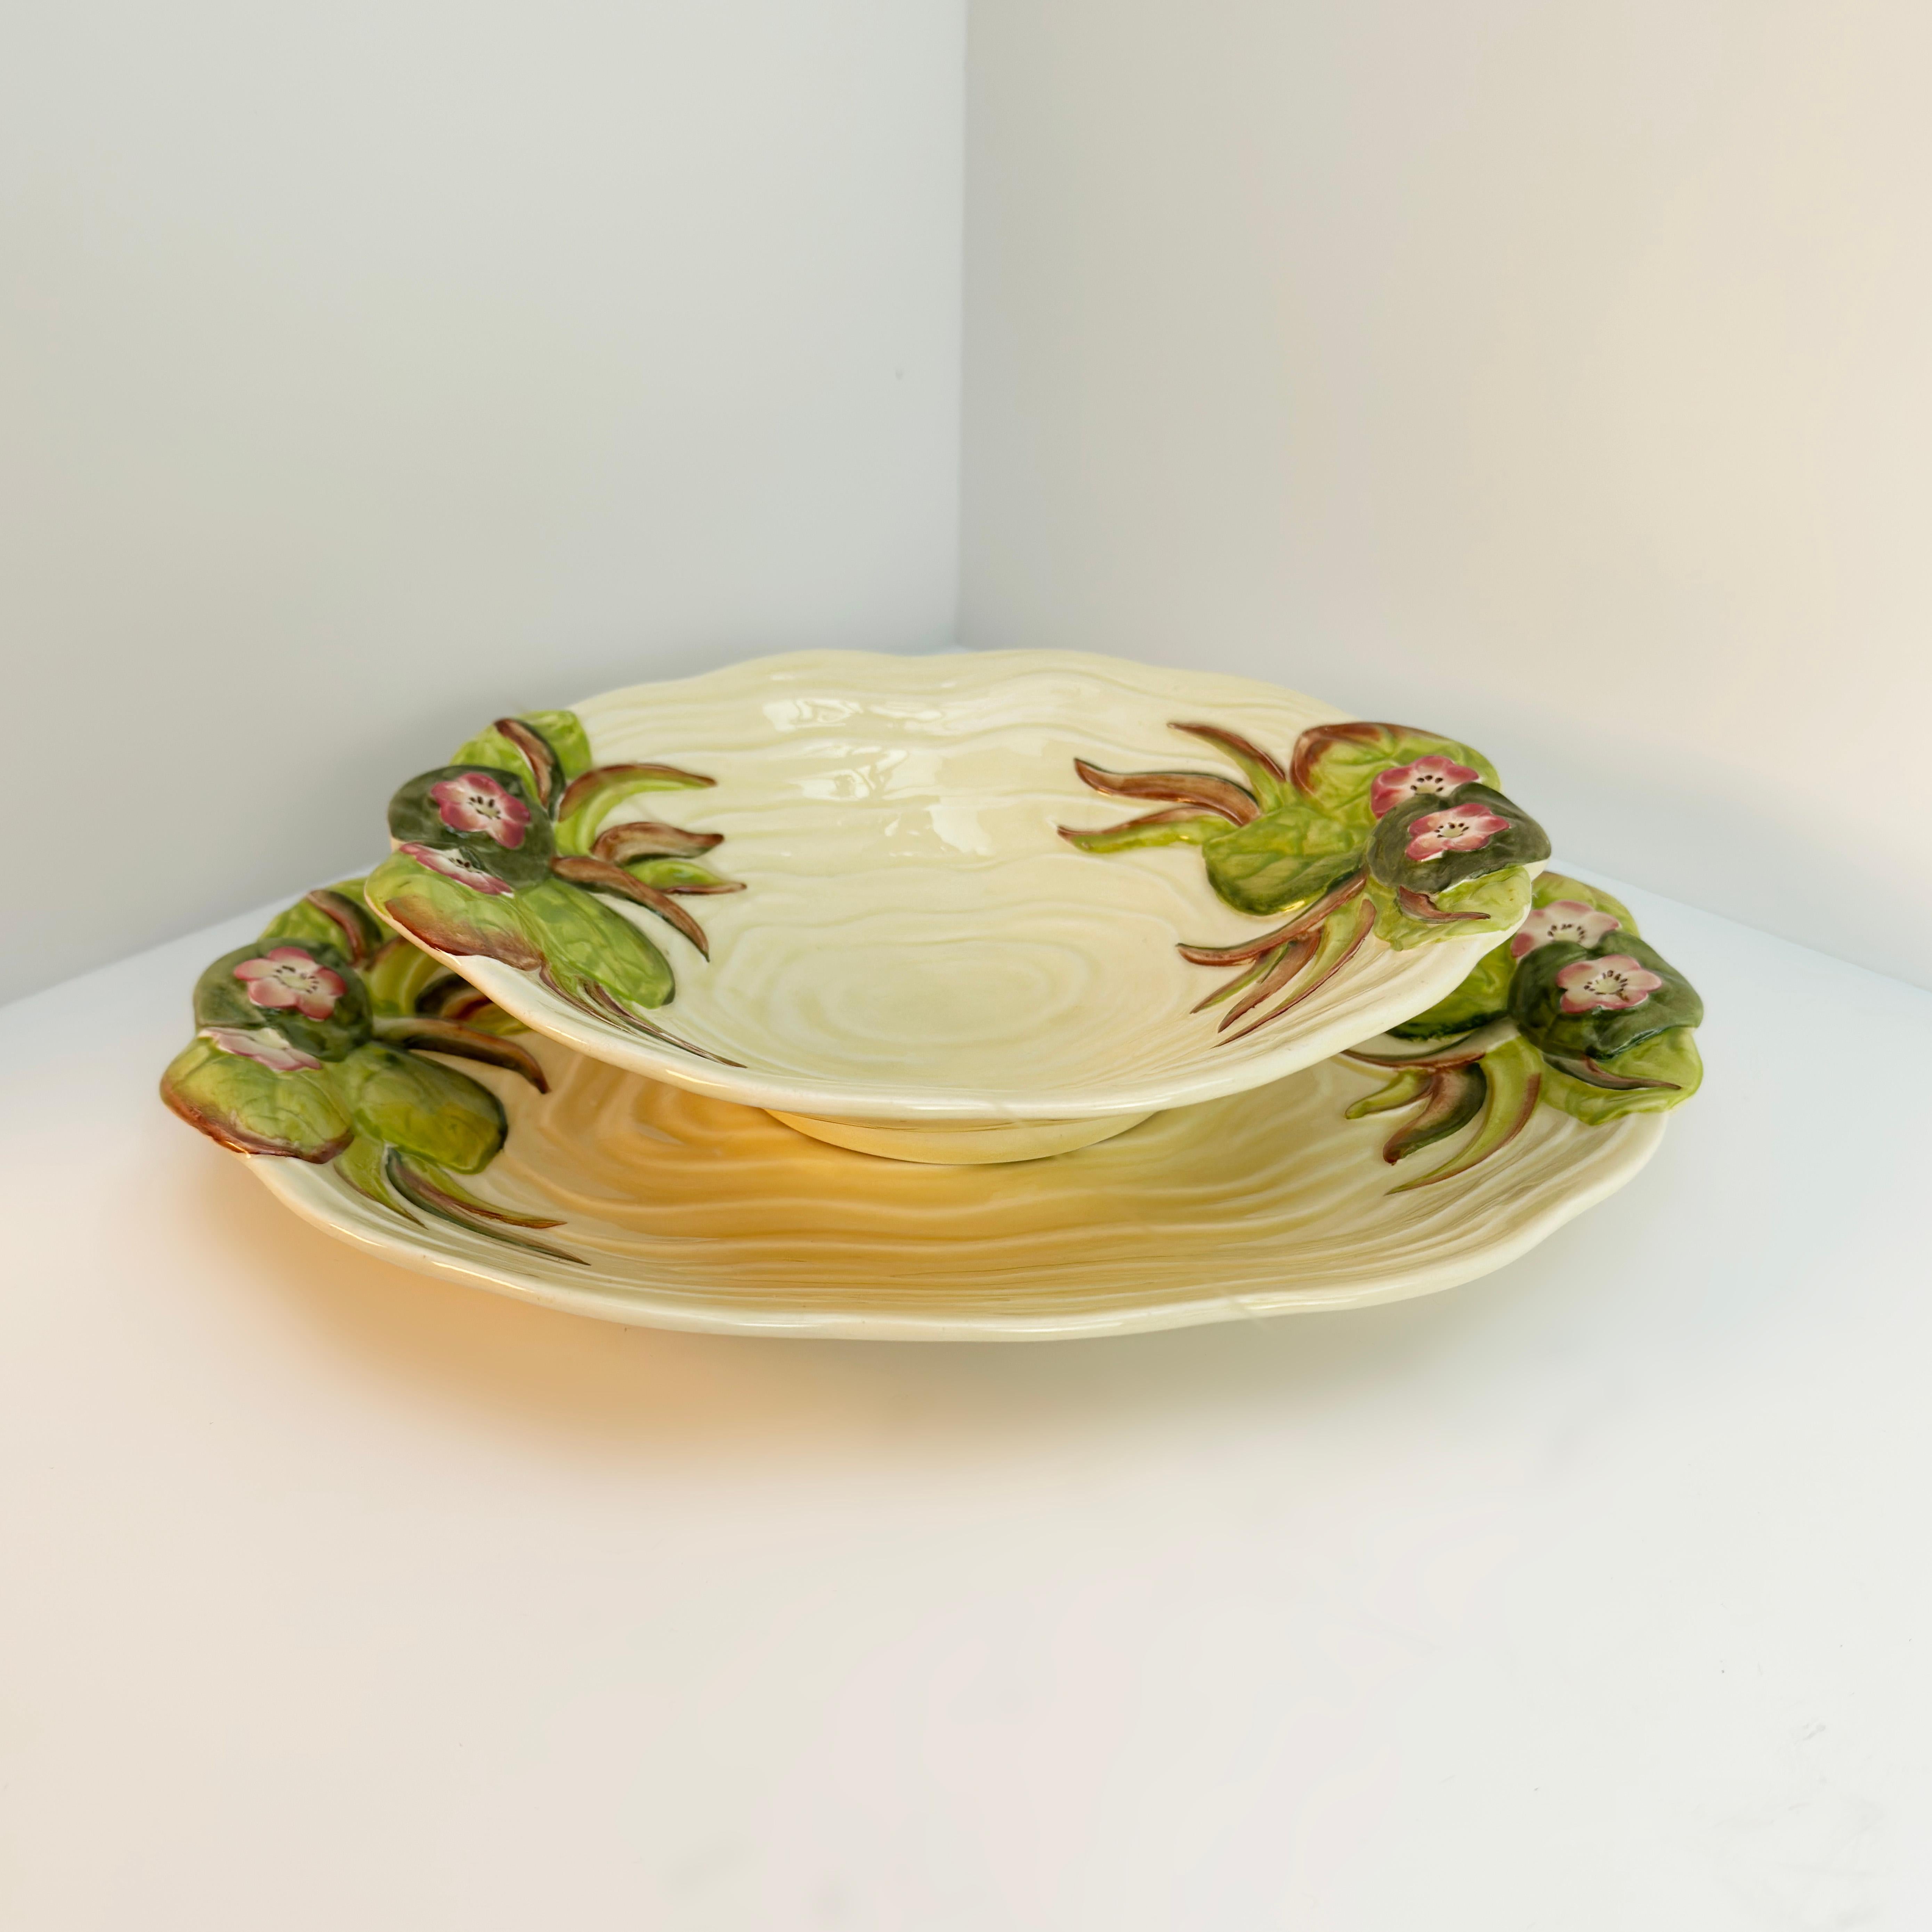 An Art Deco serving dish and  plate from Clarice Cliff's Water Lily collection for Newport Pottery in England

This beautiful serving plate and shallow dish will help you discover the whimsical charm of Clarice Cliff's beloved porcelain.

Crafted in